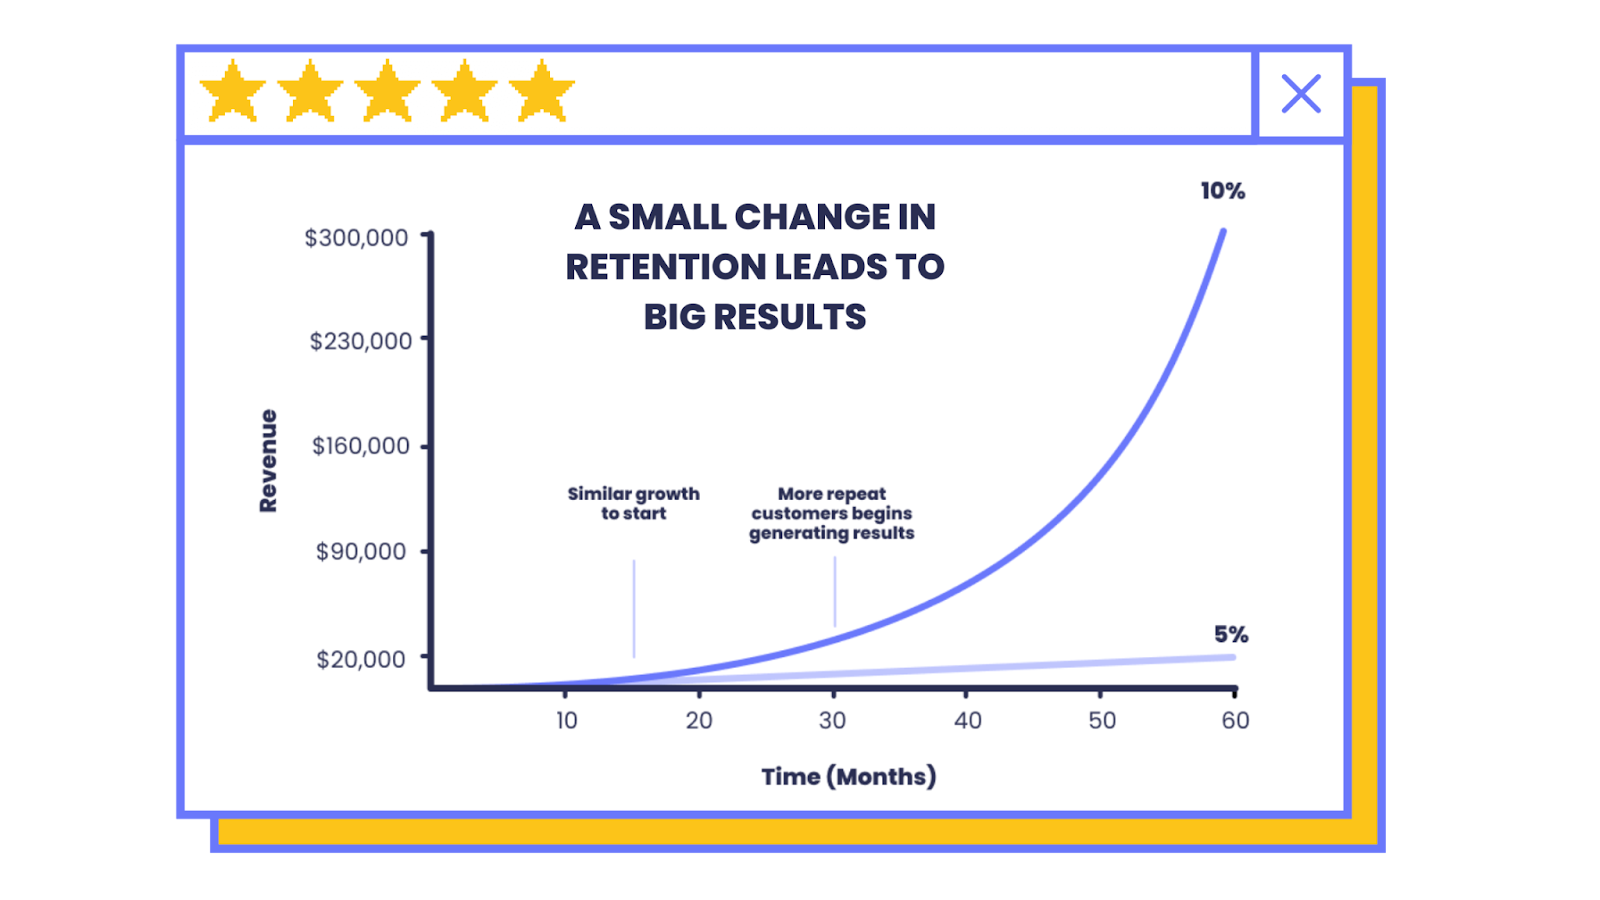 Customer Retention Definition–A graph with an exponential curve going up towards the right titled, “A small change in retention leads to big results”. The y-axis (vertical) measures revenue and the x-axis (horizontal) measures the time in months. There are 2 lines. One flat line shows steady revenue growth for a brand that retains 5% of its customers. The curved exponential growth line represents a brand that retains 10% of its customers. There are two anecdotes on the graph–one near the 15 month mark says, “similar growth to start”, and the second around the 30 month mark says, “more repeat customers begins generating results”.